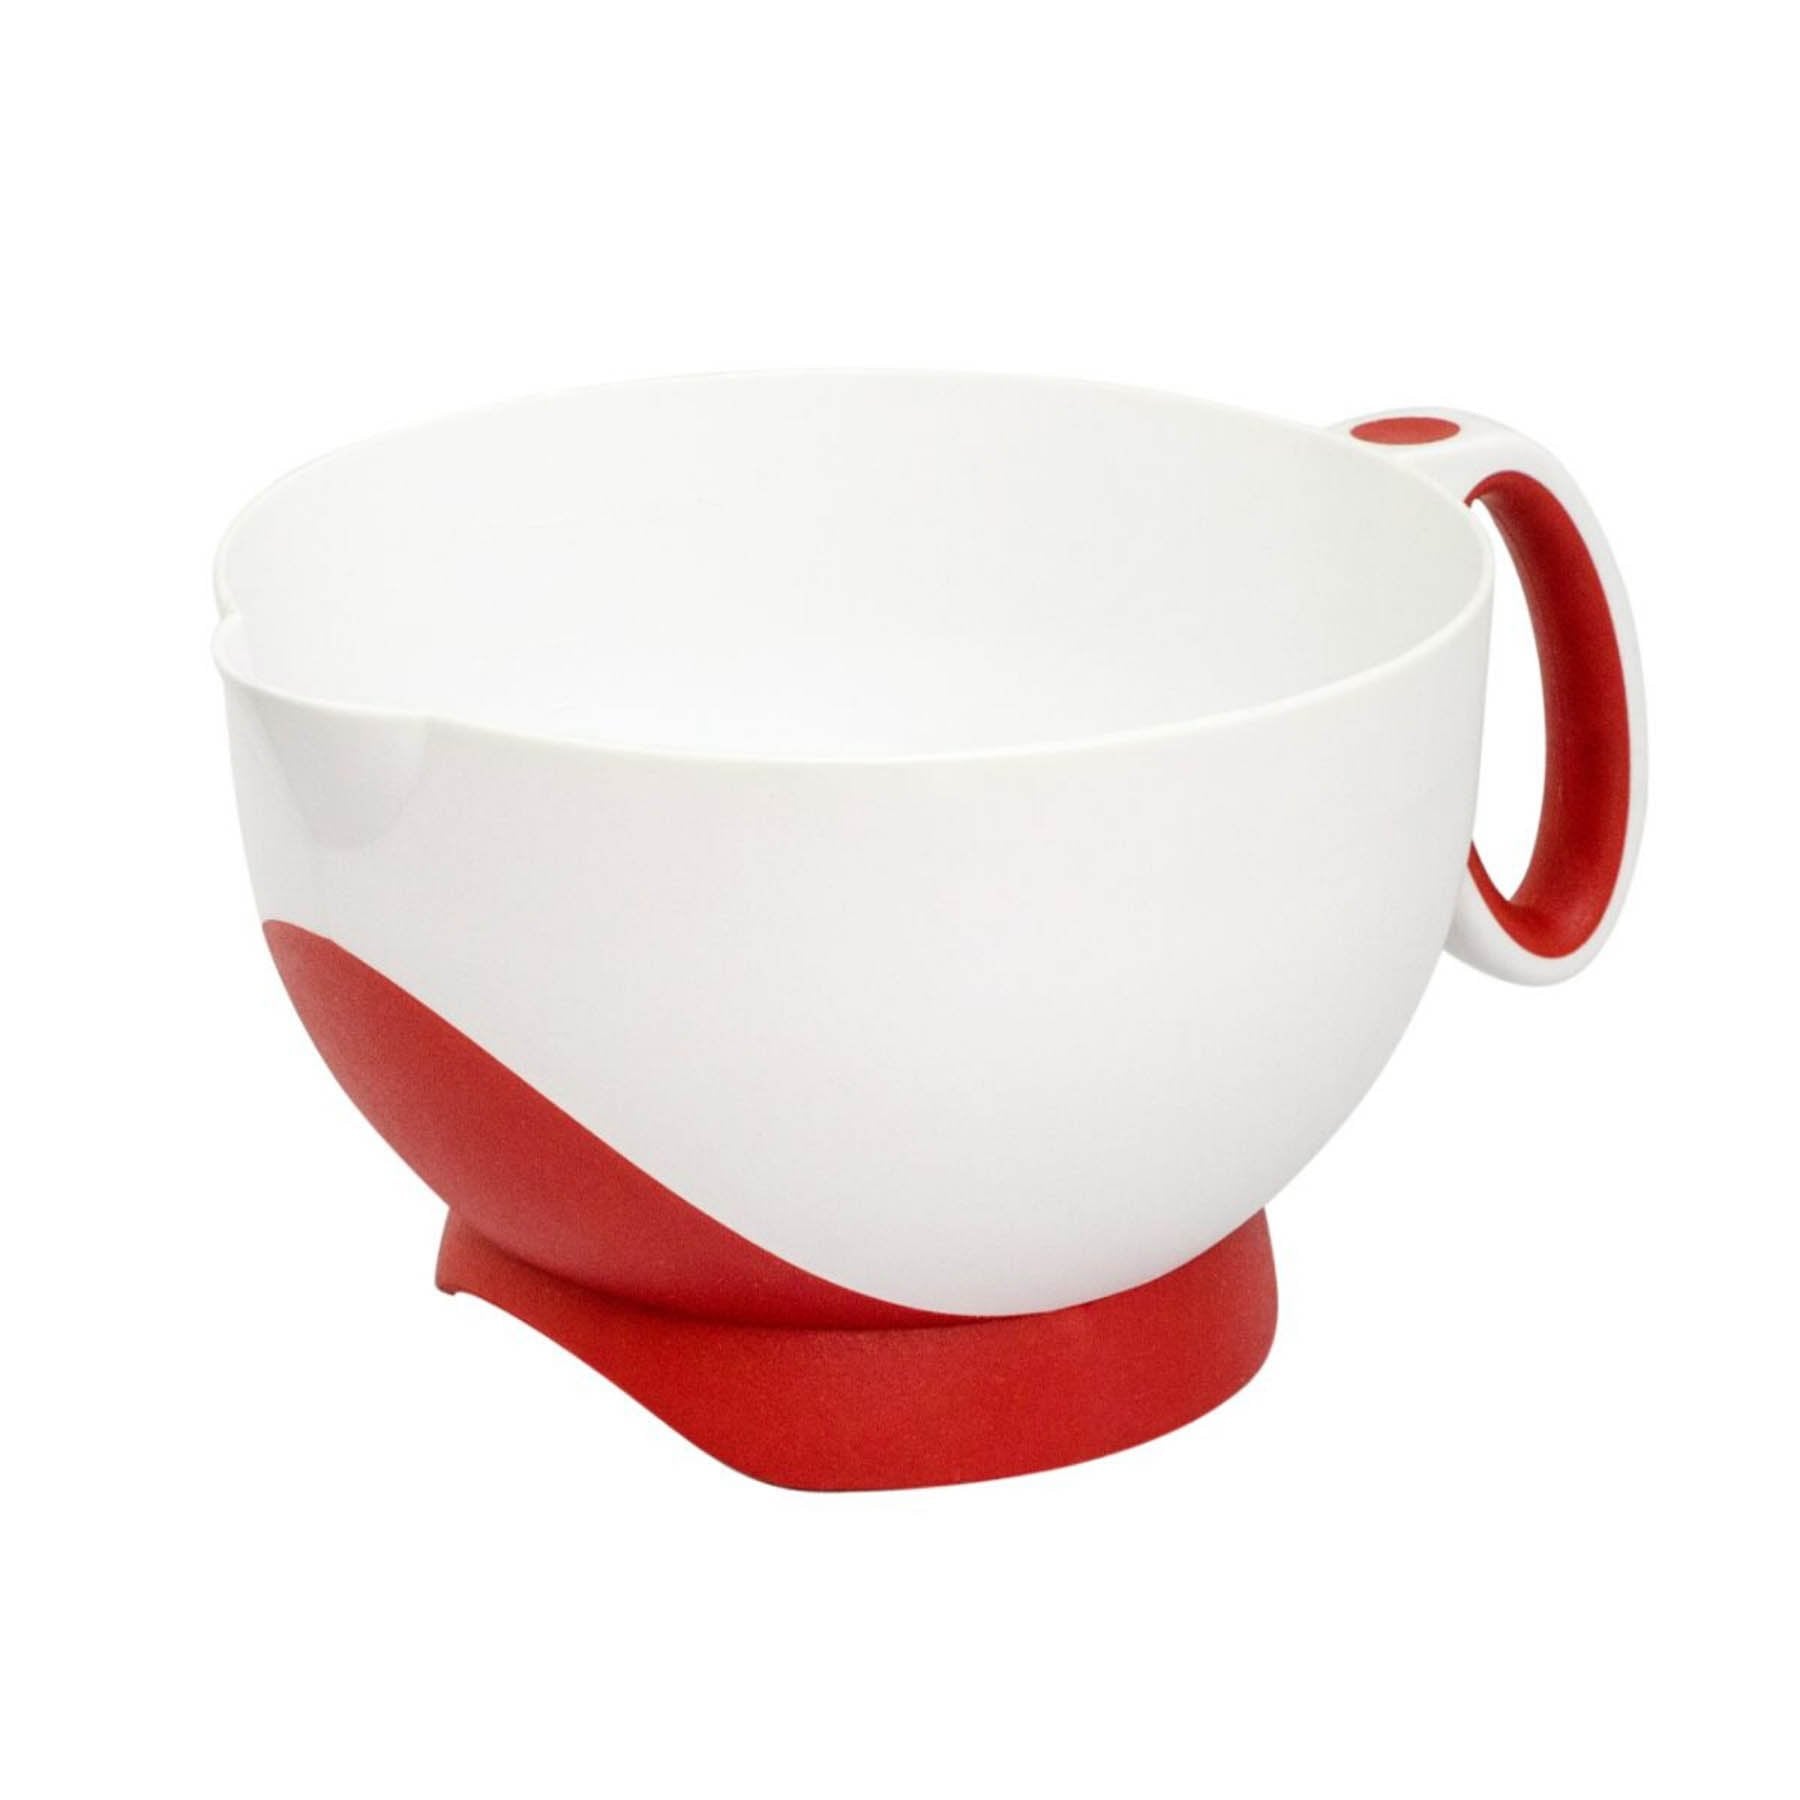 Ceramic White mixing bowl pitcher with handle